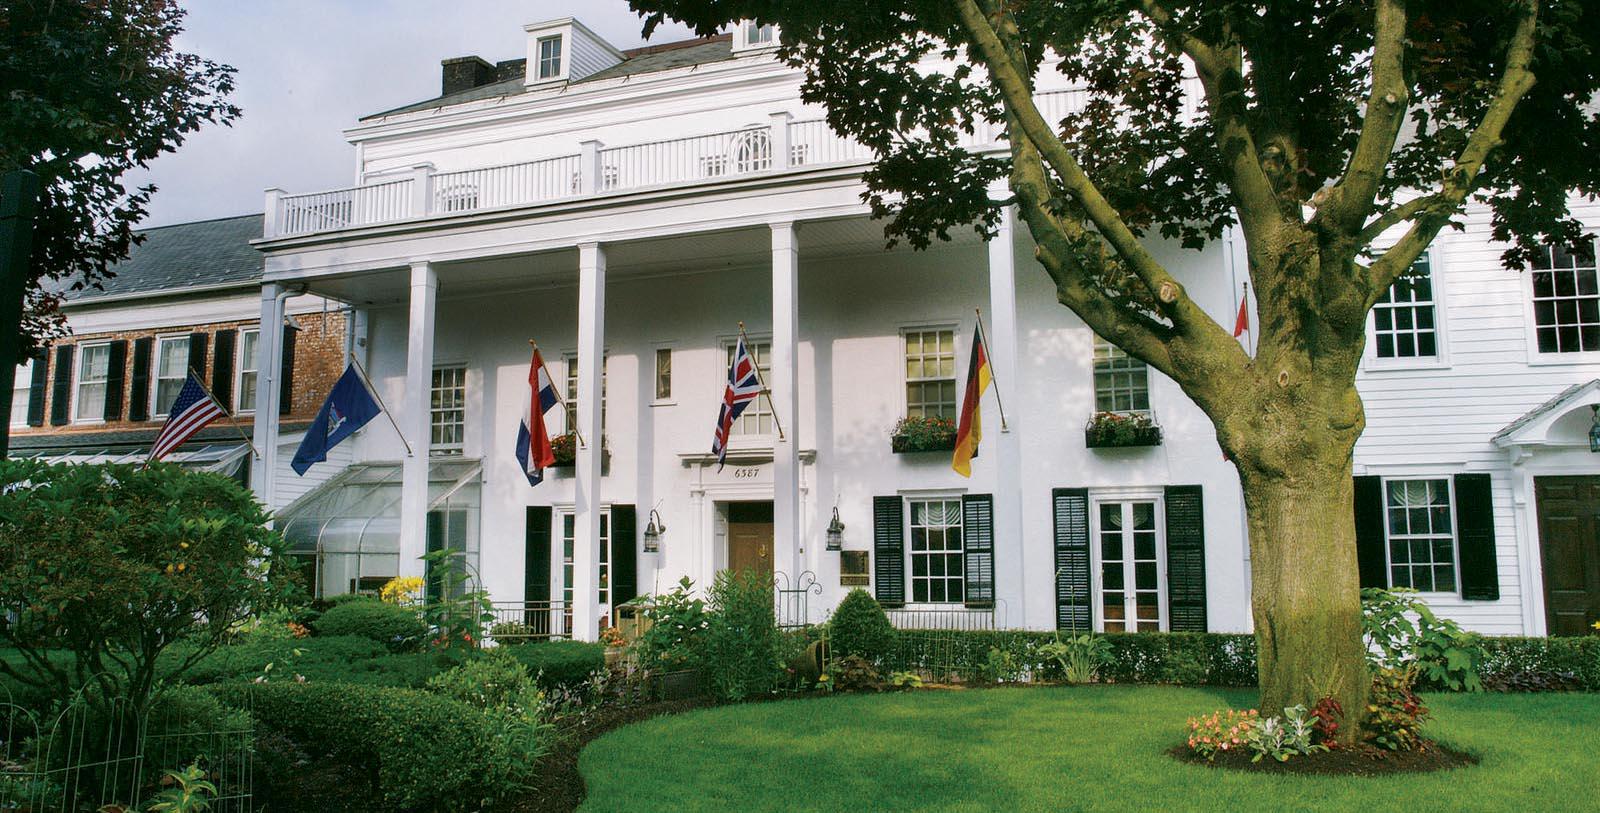 Image of Hotel Exterior at Beekman Arms and Delamater Inn, 1766, Member of Historic Hotels of America, in Rhinebeck, New York, Overview